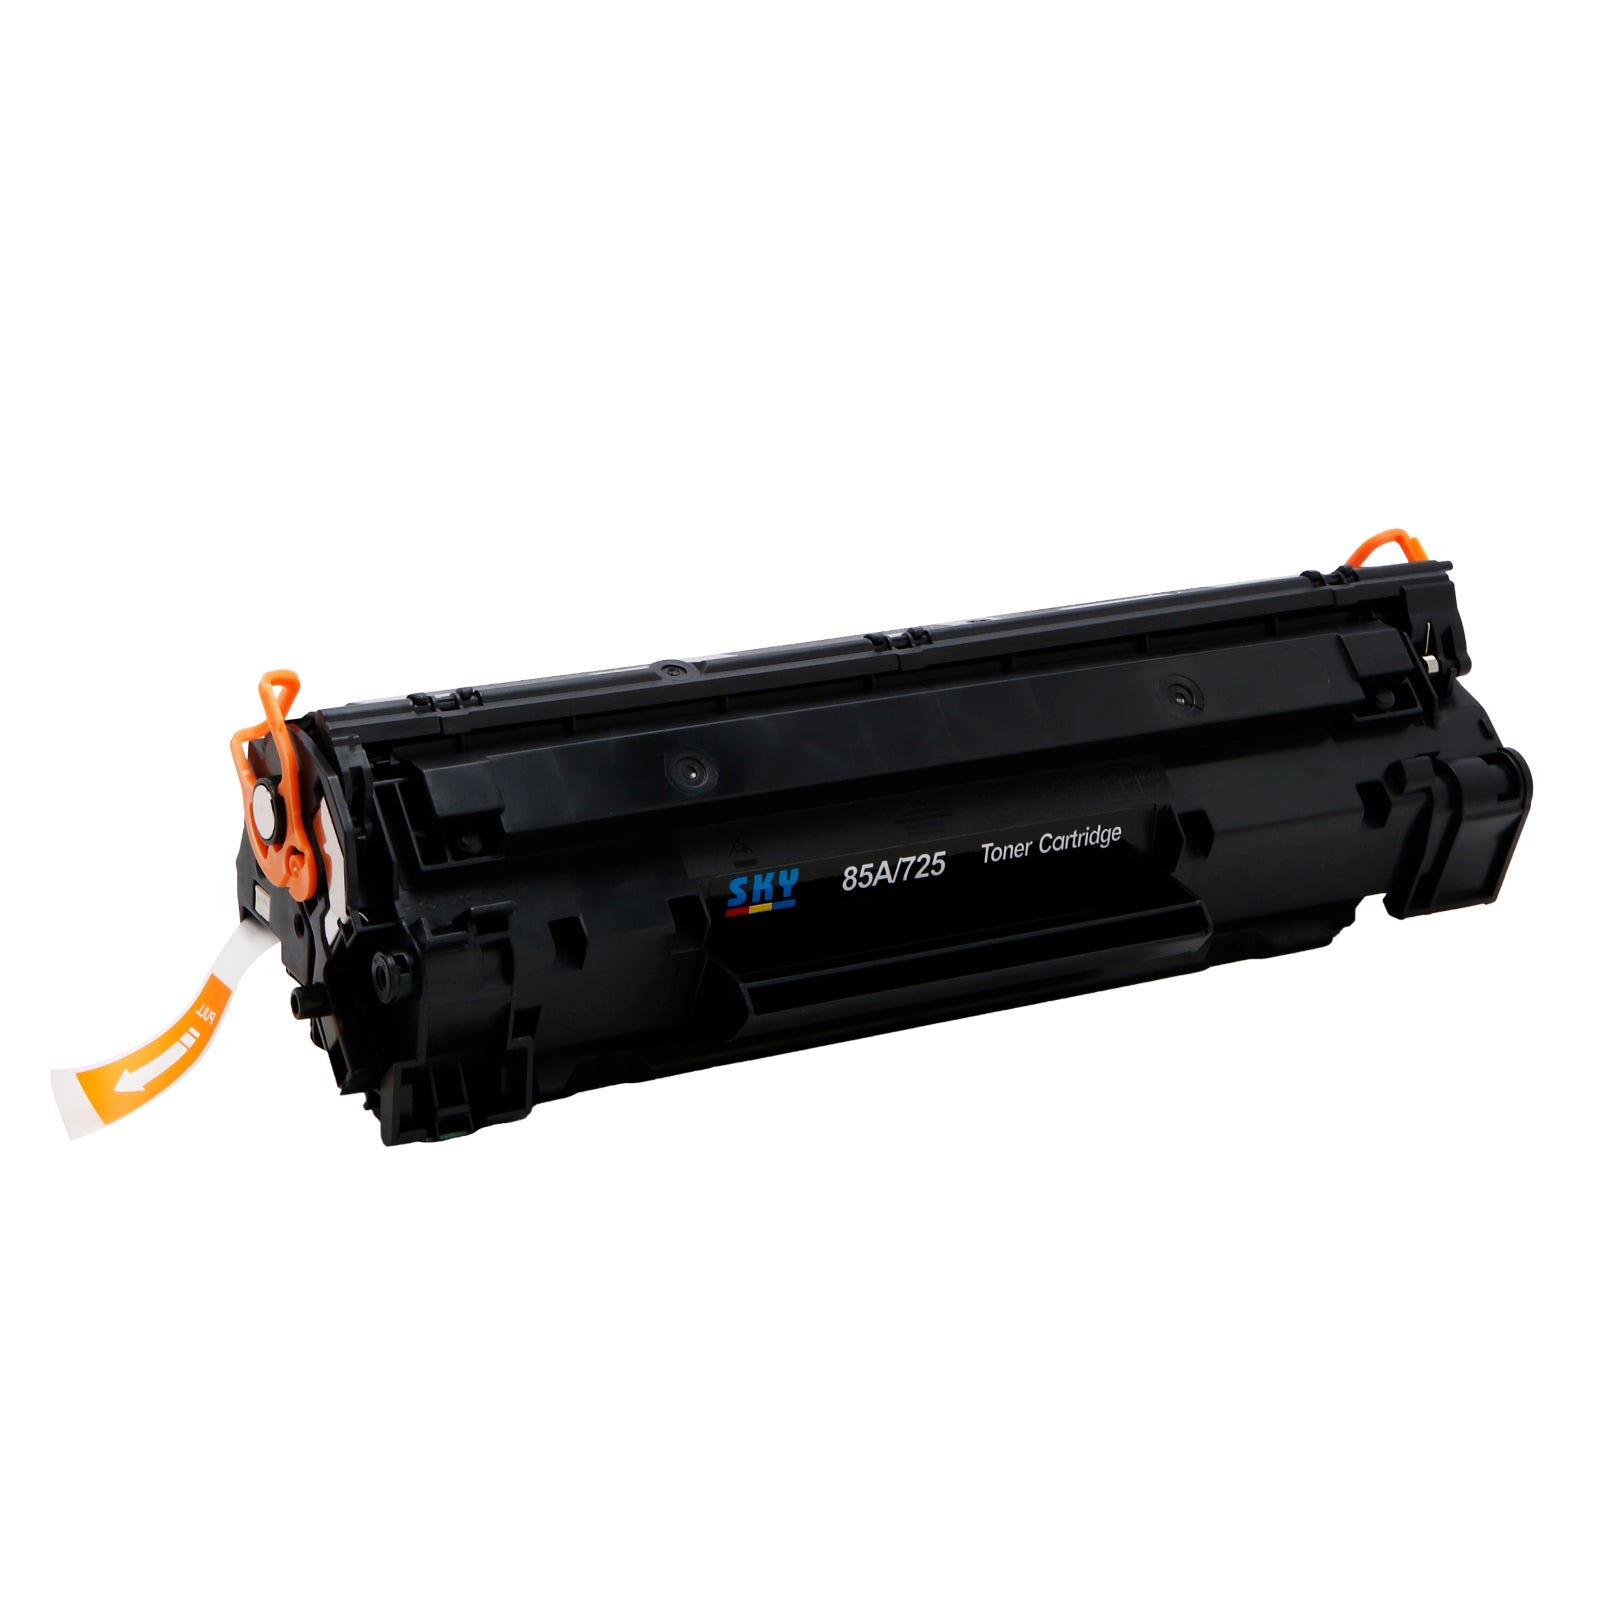 SKY Compatible Toner Cartridge for LBP 6030 LBP6000 6020 and MF3010 Printers